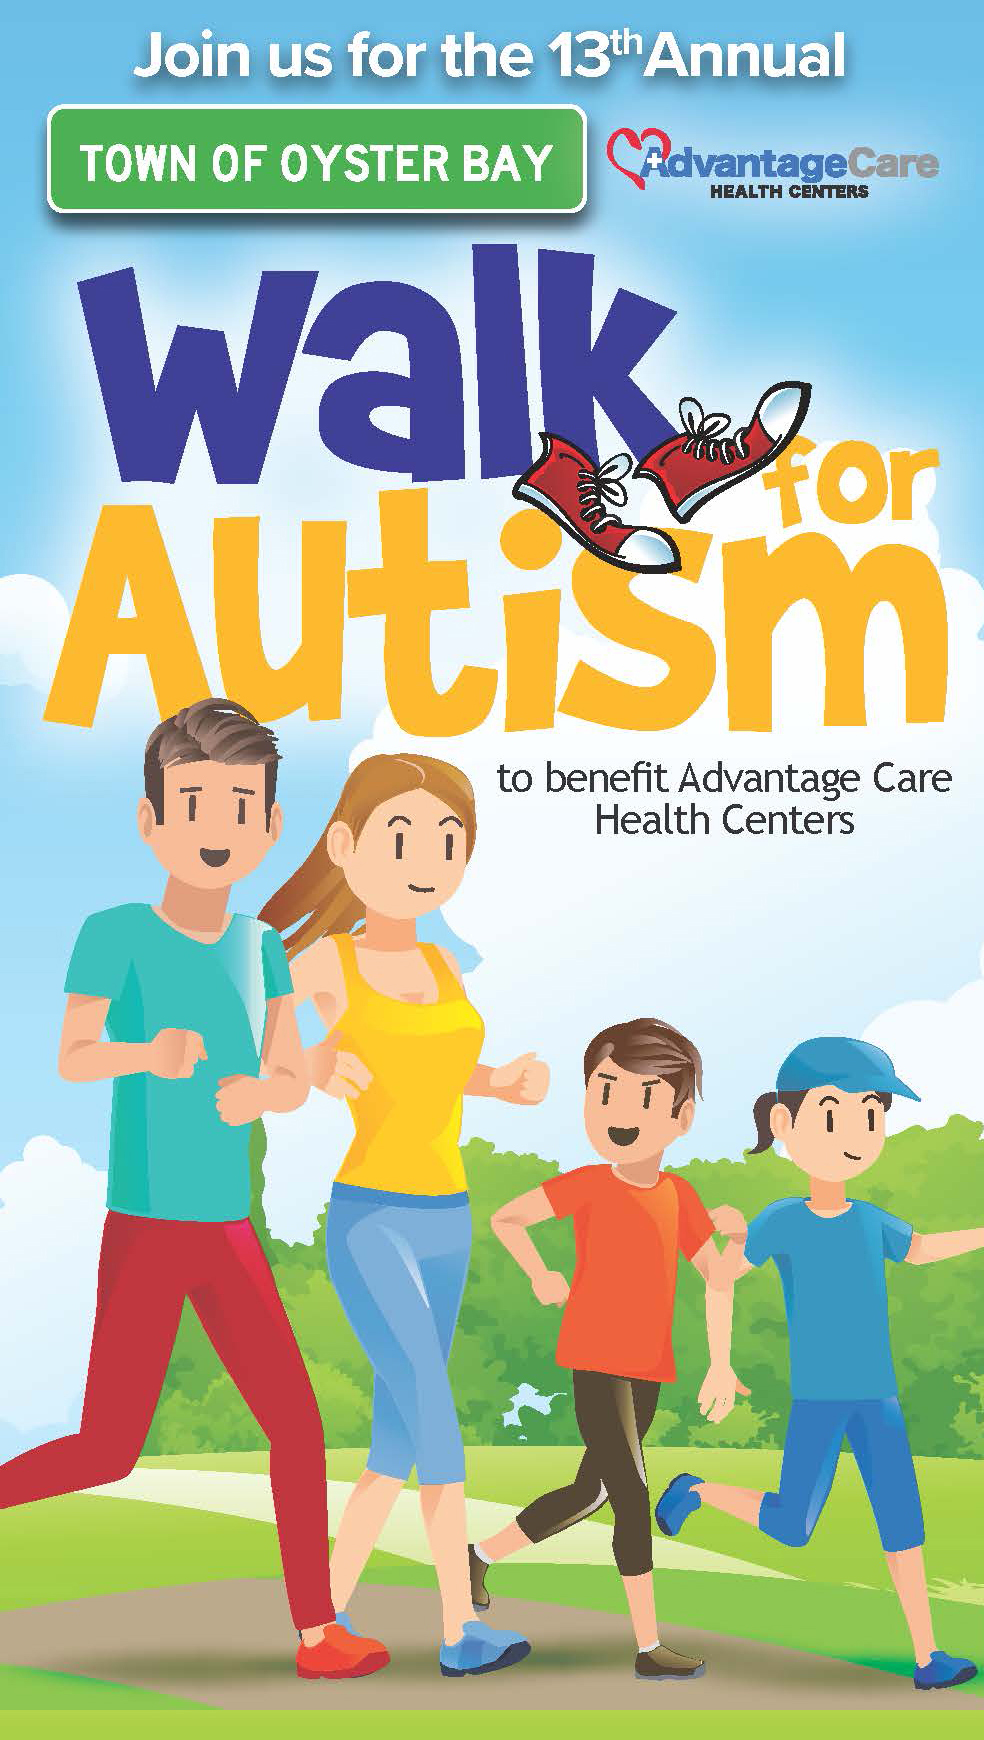 Supervisor Saladino, Councilman Hand Invite Residents to “Walk for Autism” at Burns Park